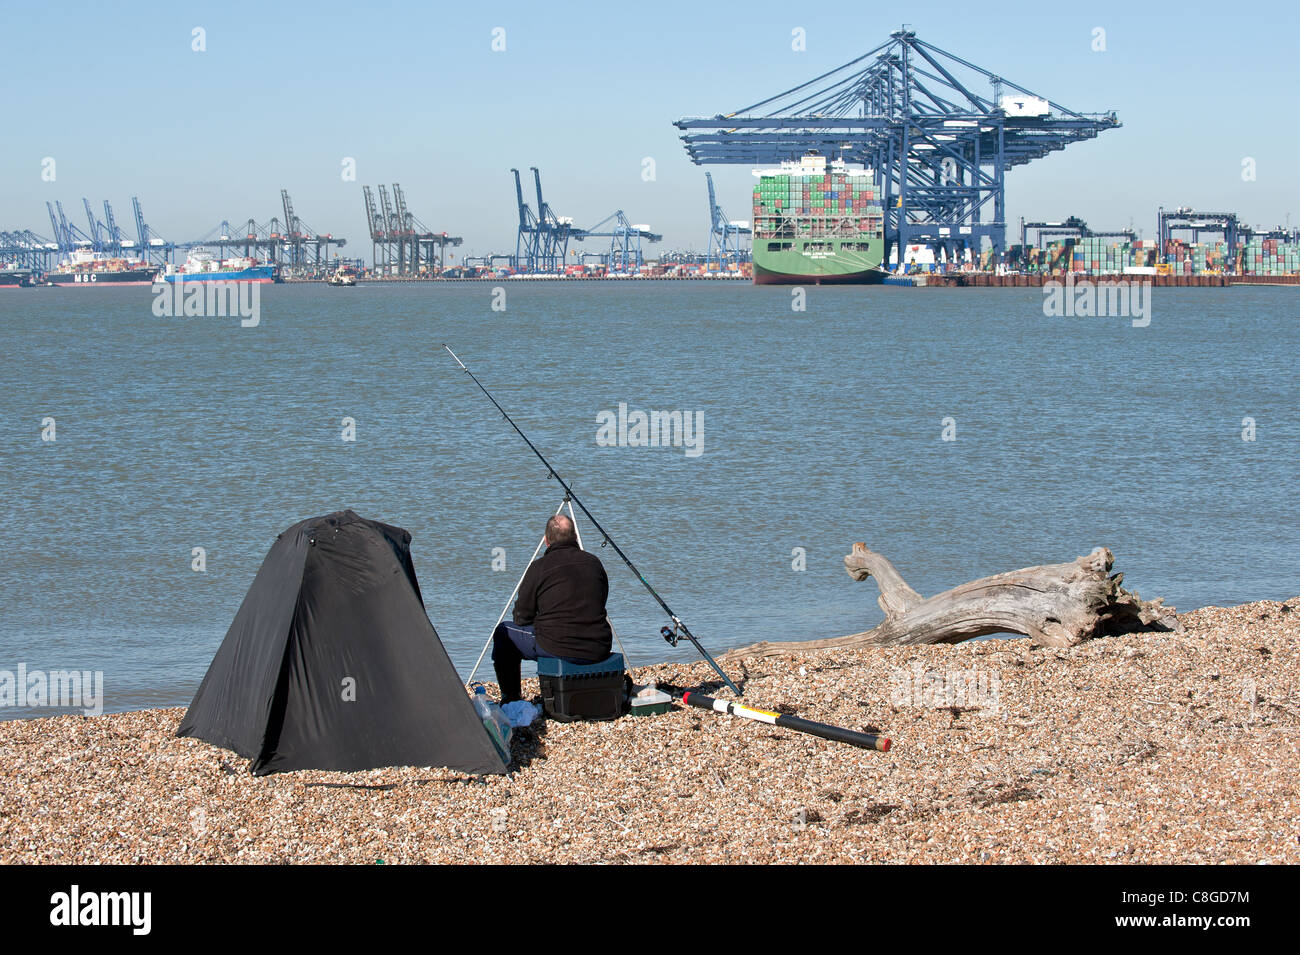 An angler fishing on the River Orwell Stock Photo